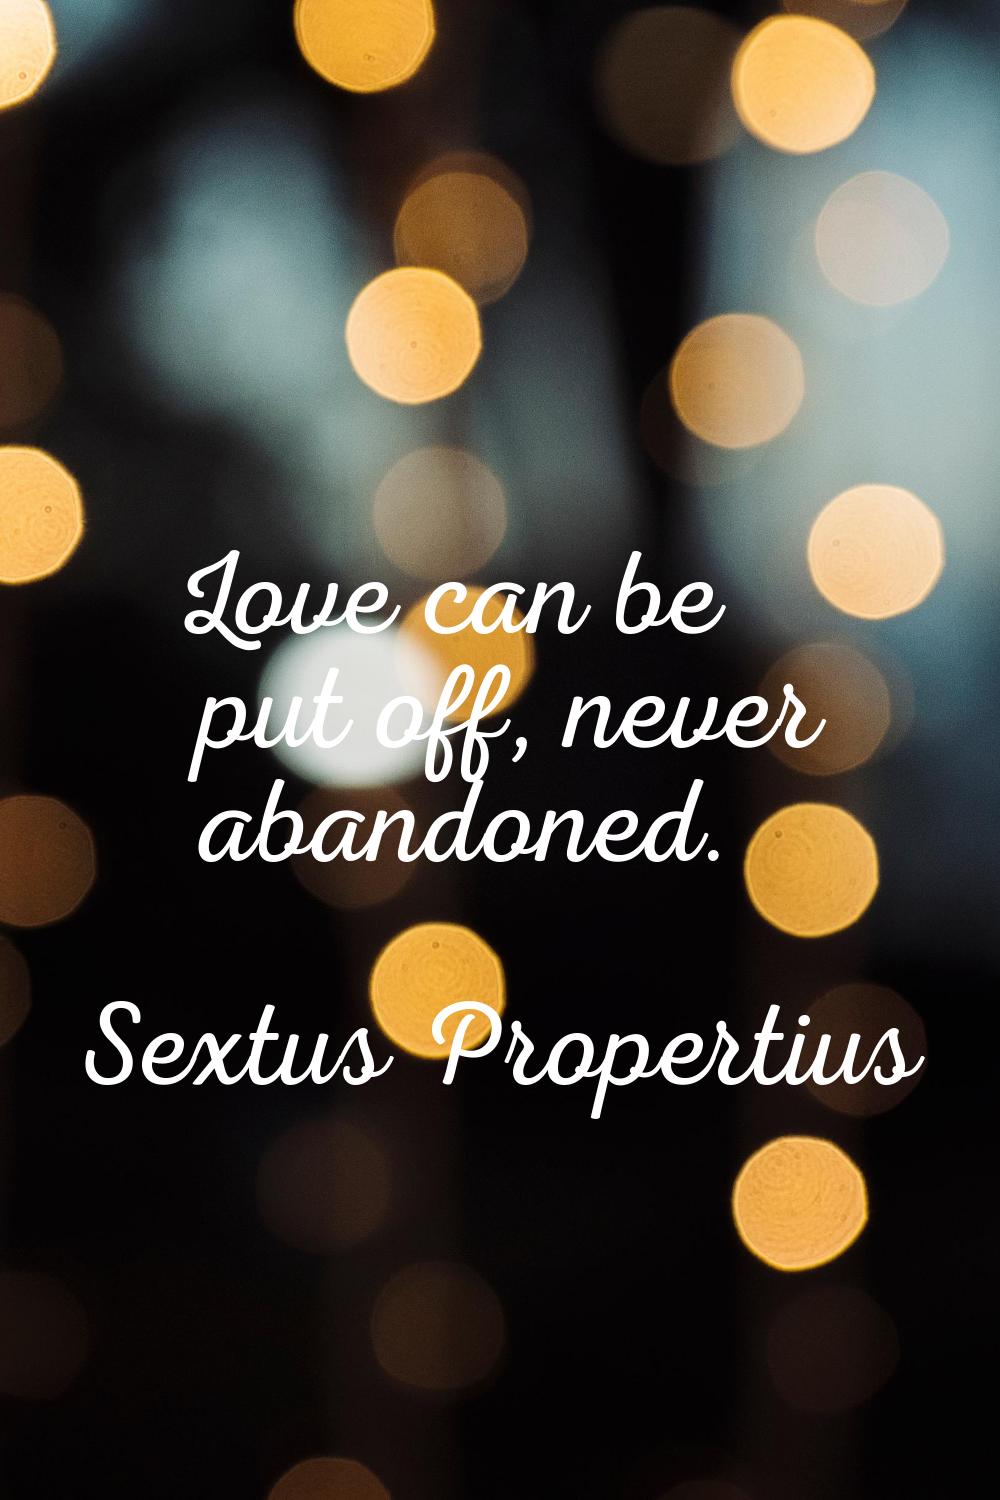 Love can be put off, never abandoned.